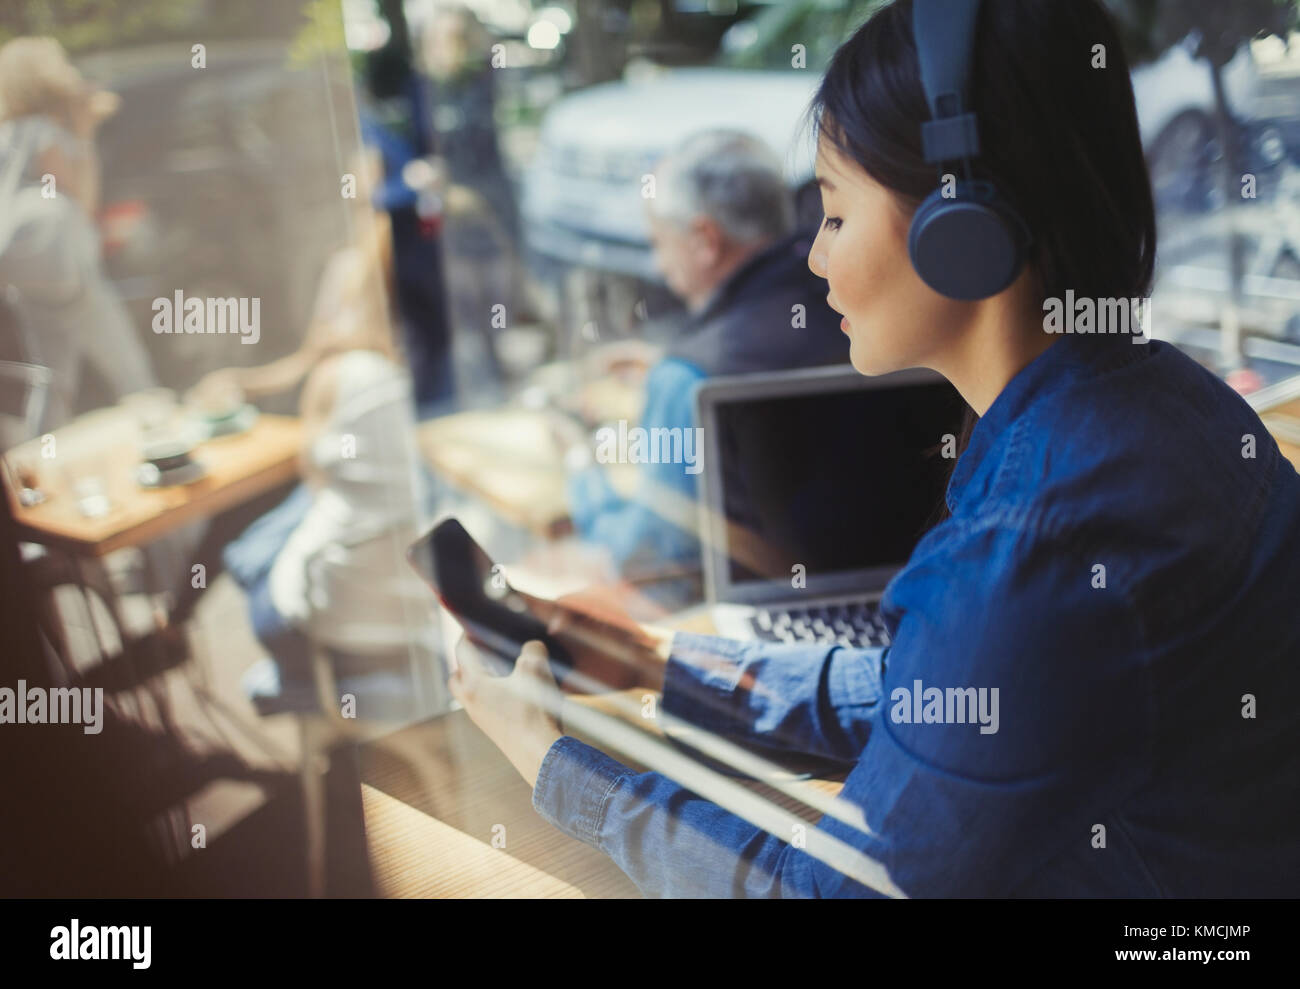 Young woman listening to music with headphones, texting with cell phone at cafe window Stock Photo